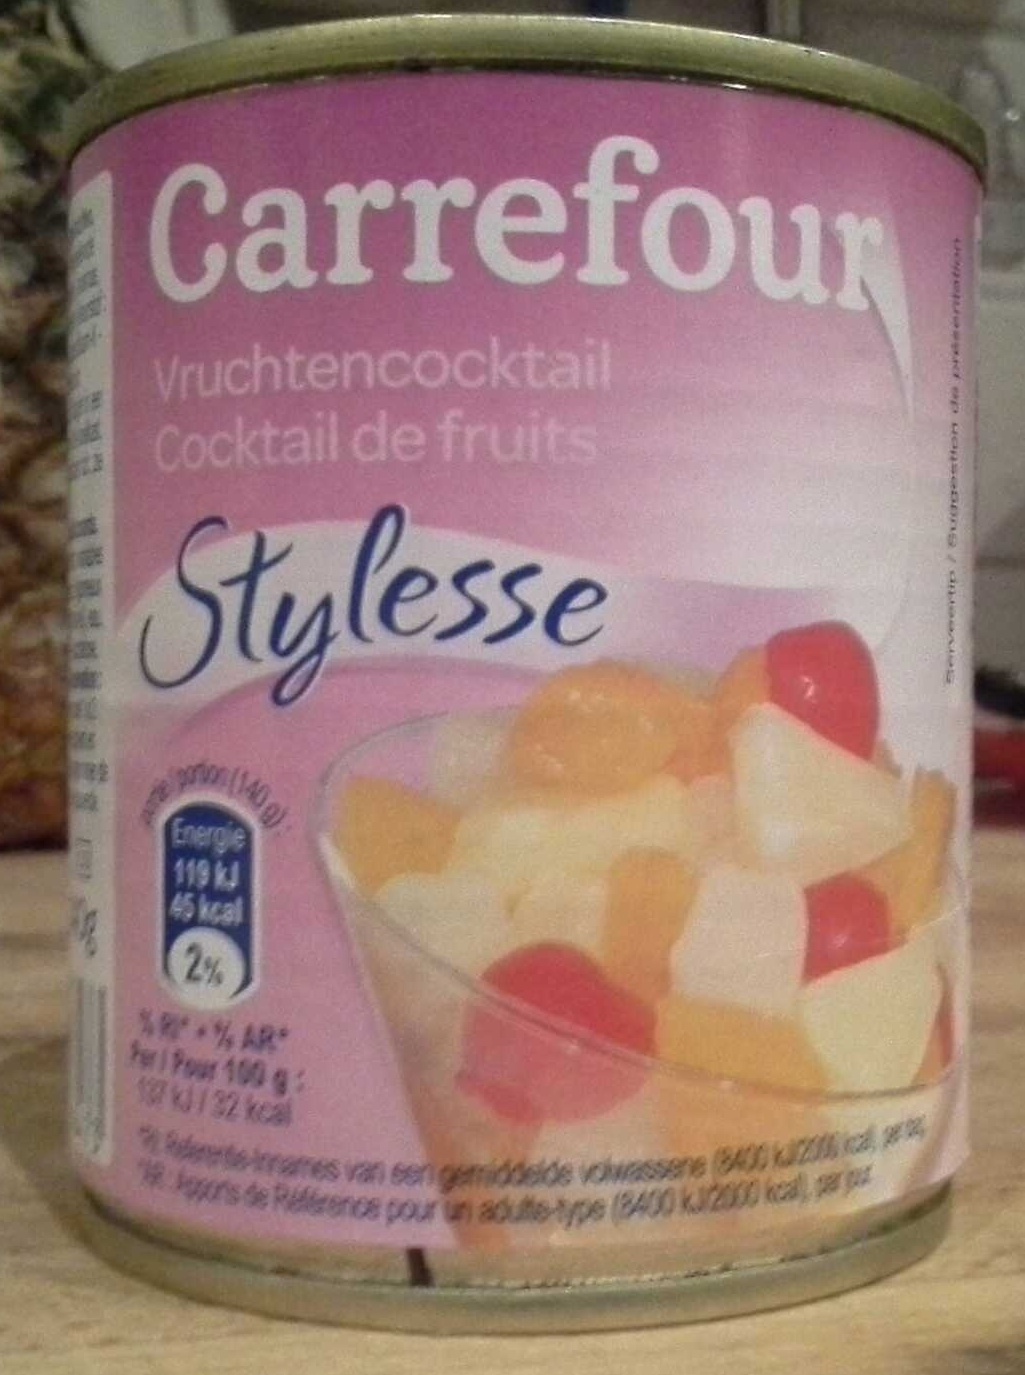 Cocktail de fruits stylesse - Product - fr